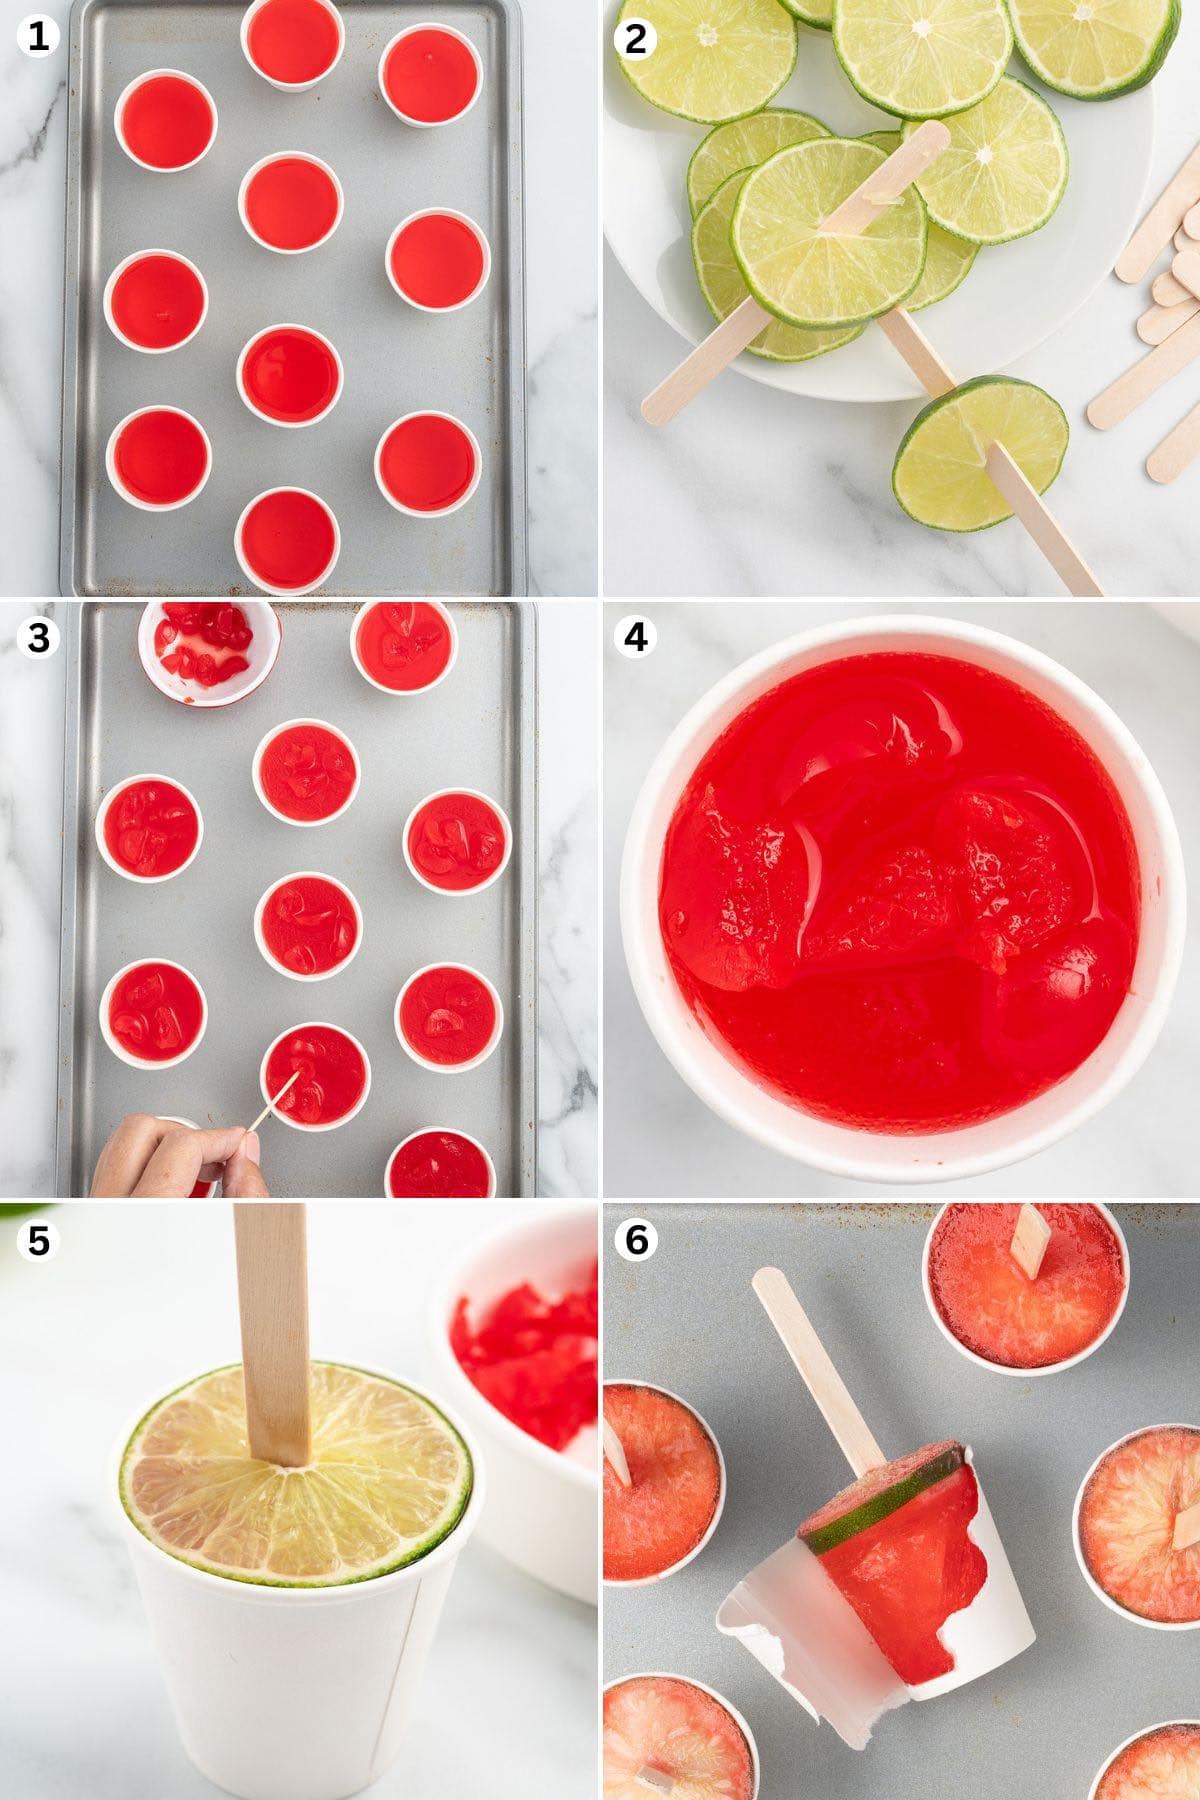 Pour the Dirty Shirley popsicle mix into each paper cup. Stick the popsicle stick through the center of a single lime slice. Add sliced maraschino cherries into each of the cups. Push down the cherries. Place a popsicle stick with lime slice into the center of each cup. Chill. Gently tear the paper cups.